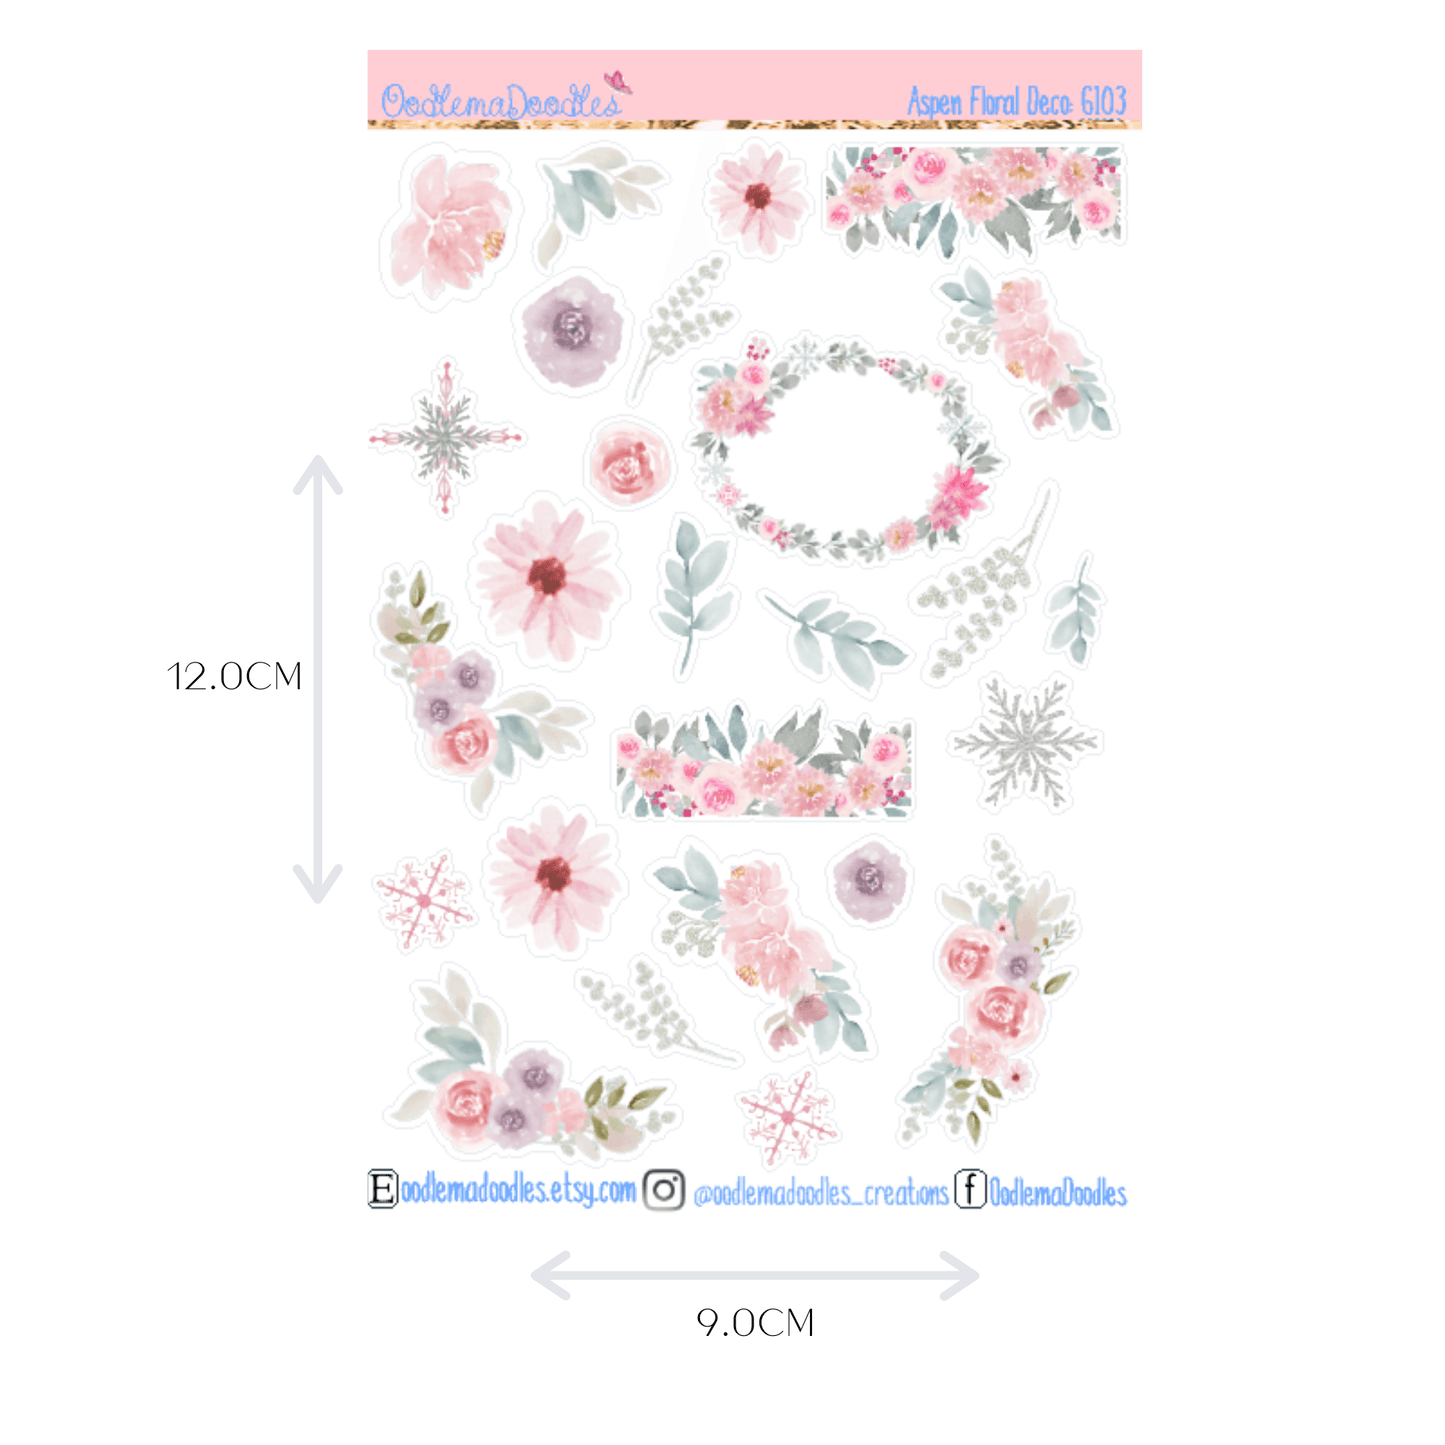 Aspen Floral Decorative Stickers - oodlemadoodles